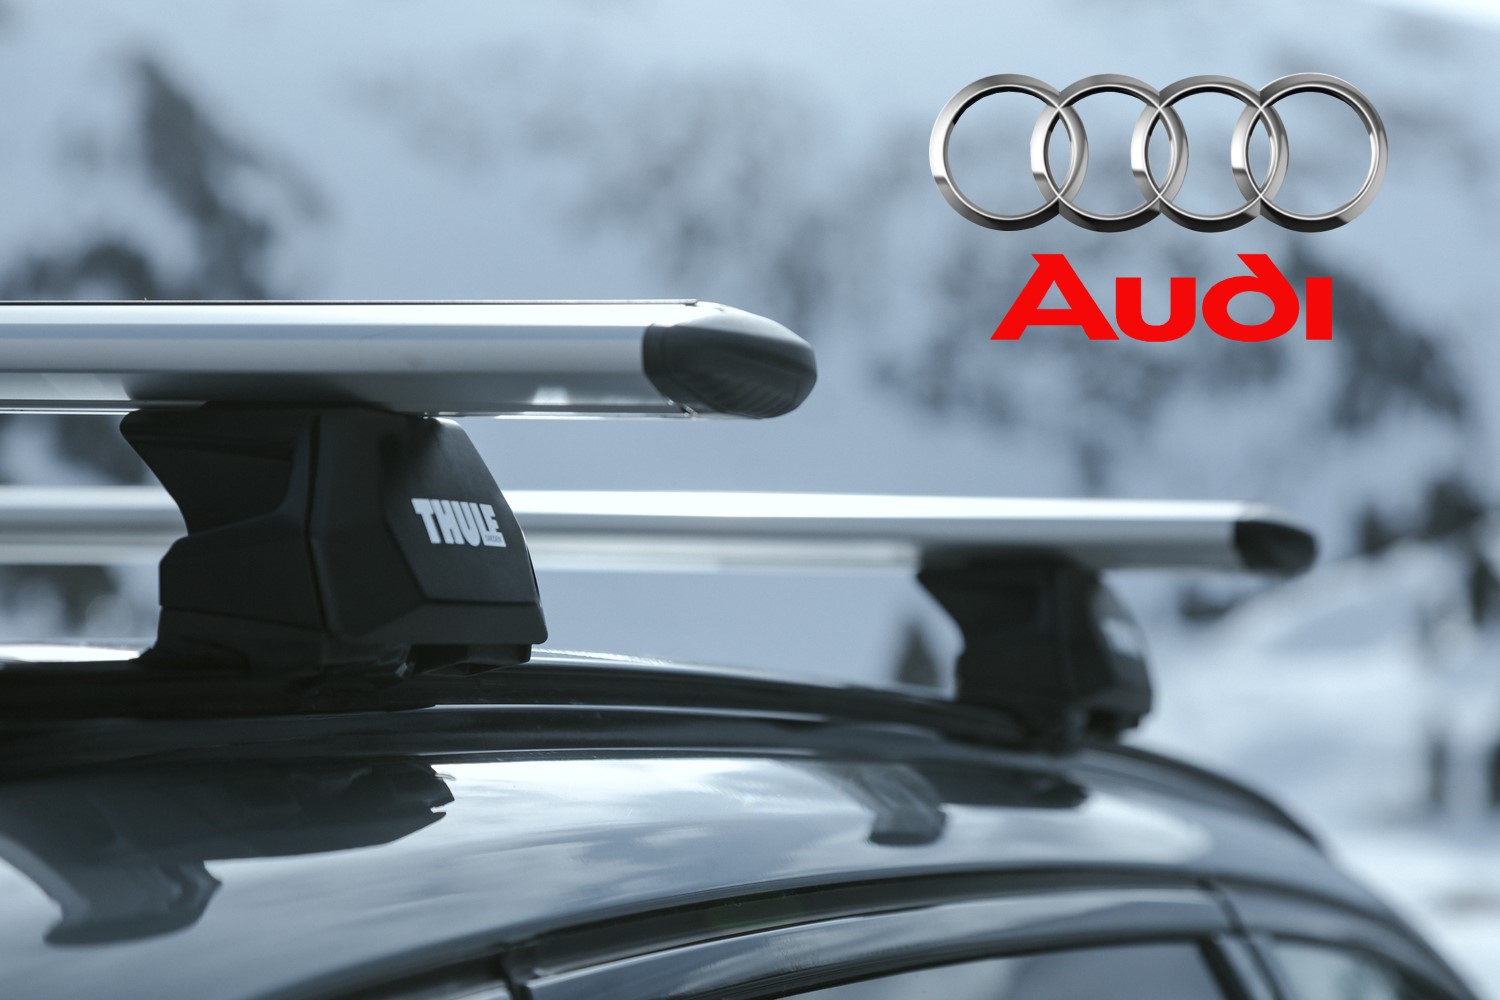 Audi A7 roof bars by Thule